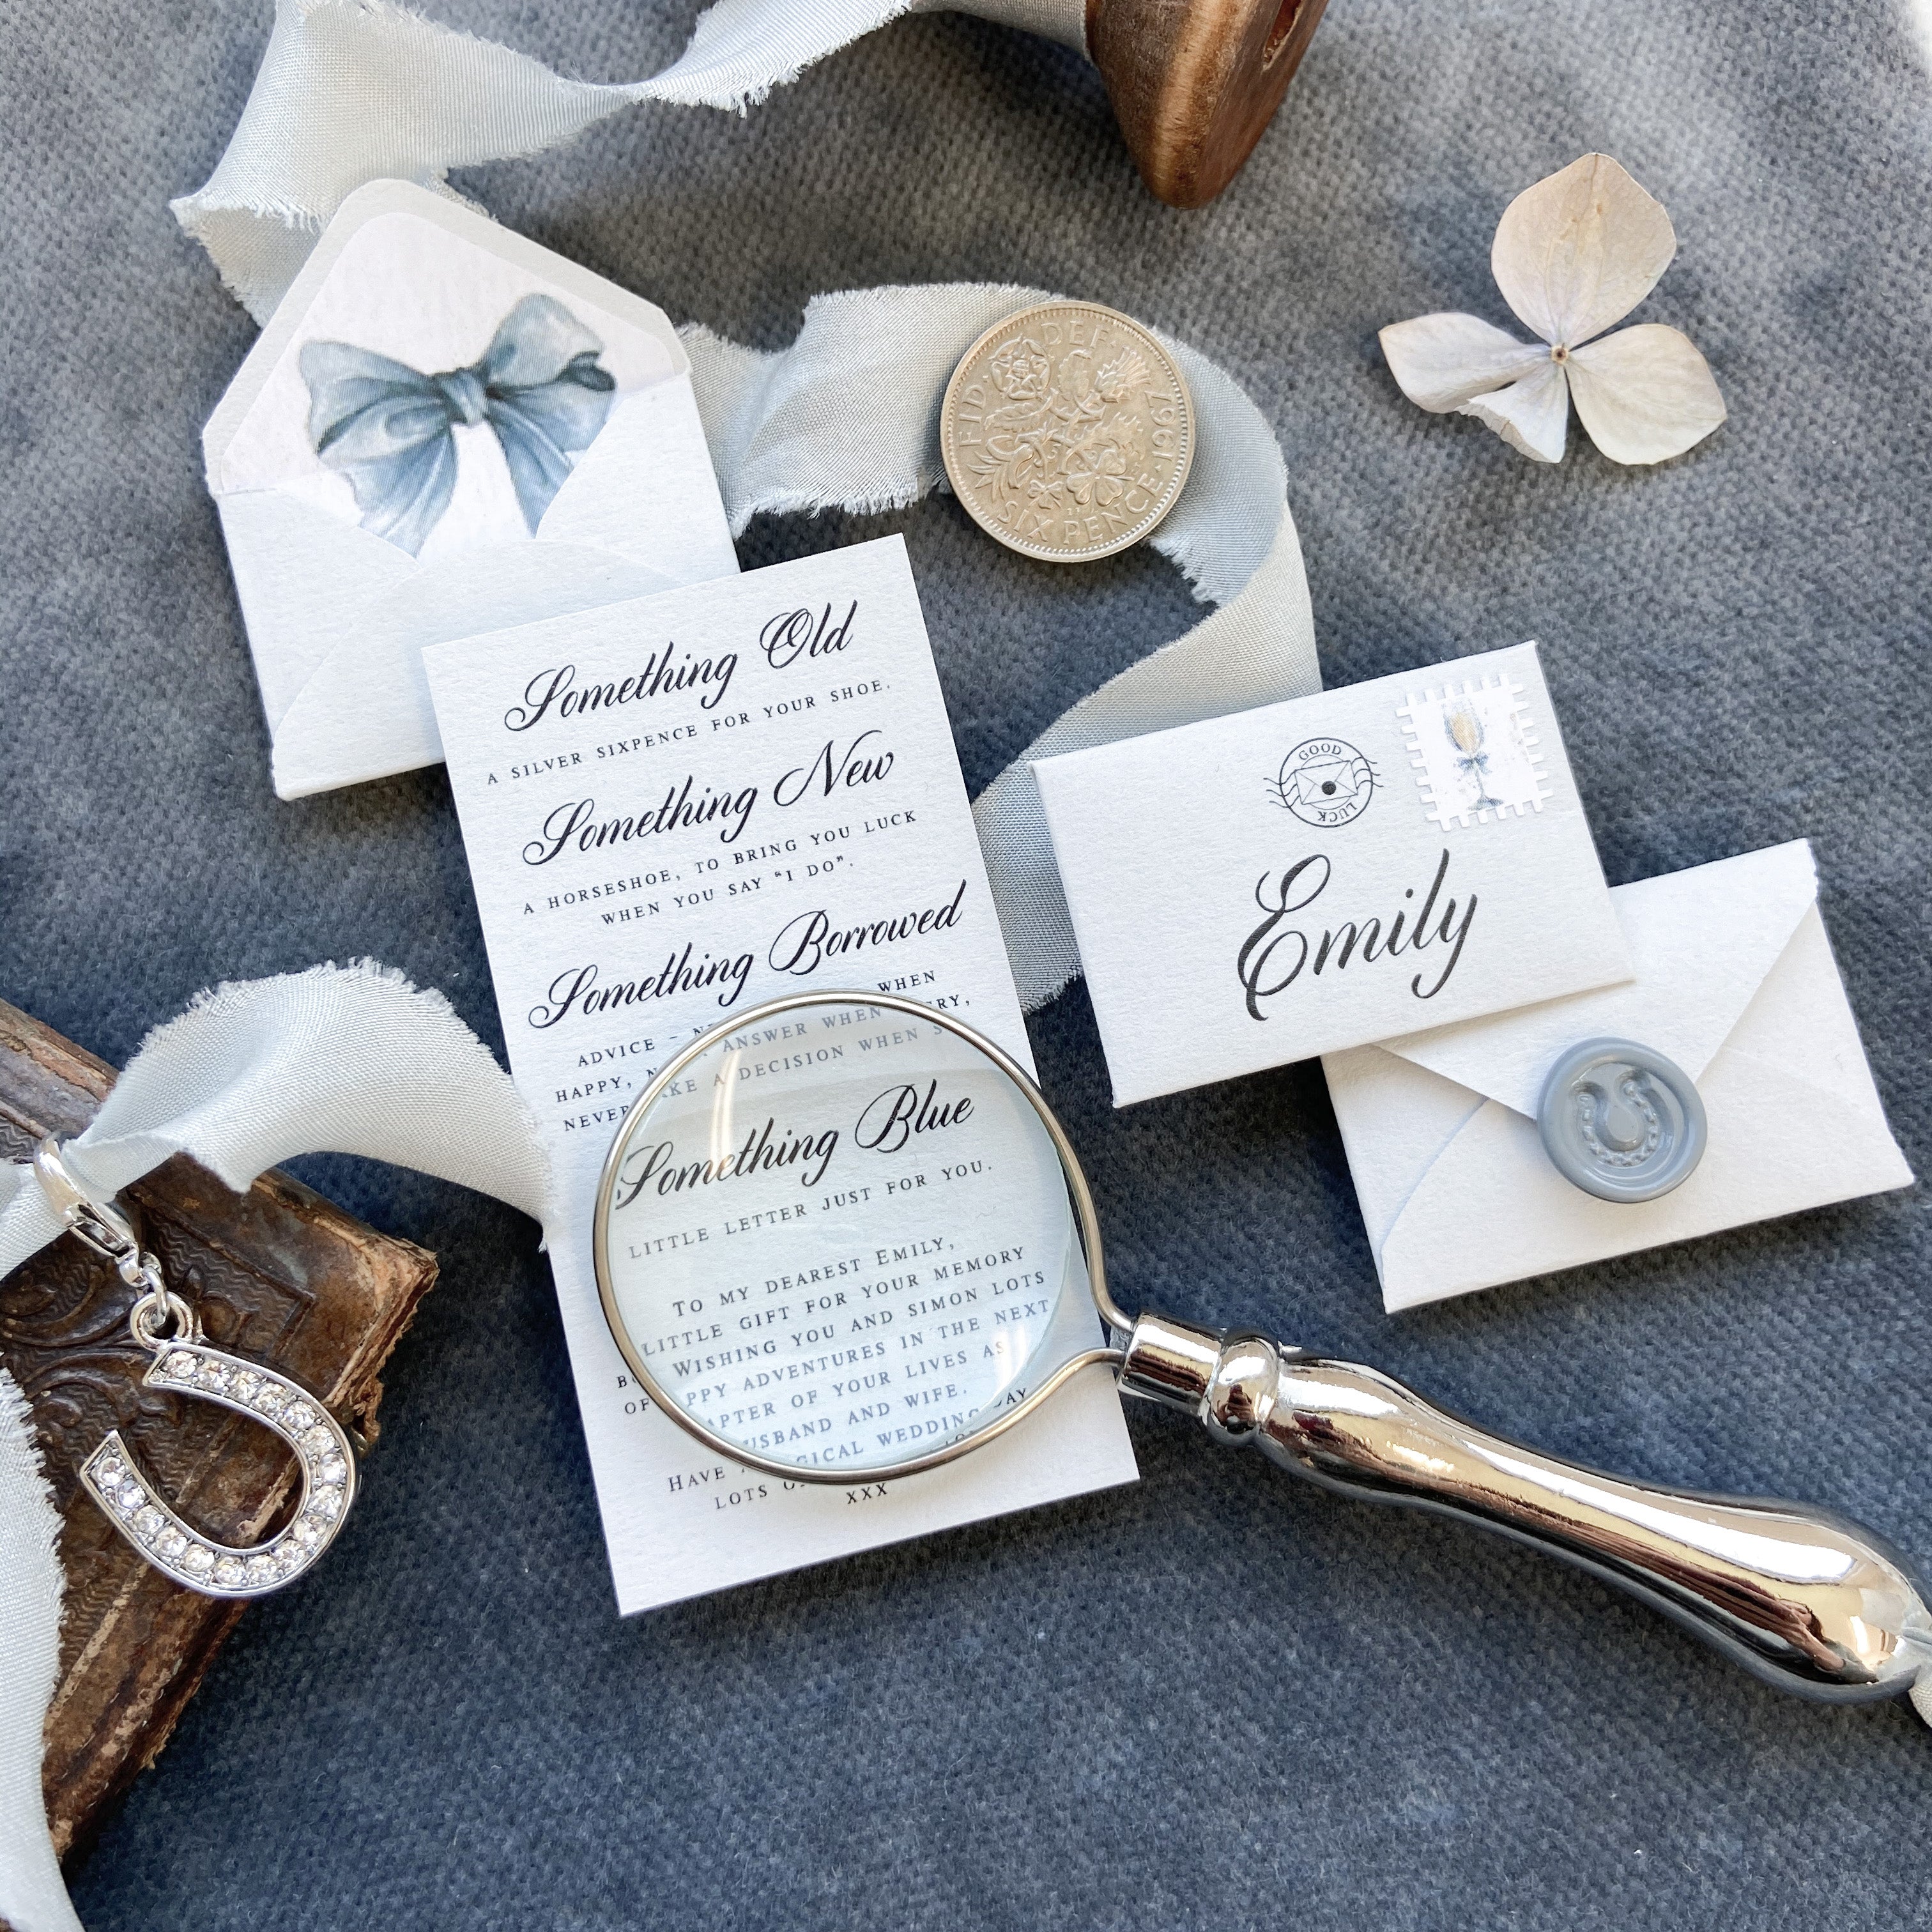 Wedding Thank-You Messages: What to Write in a Wedding Thank-You Note |  Hallmark Ideas & Inspiration